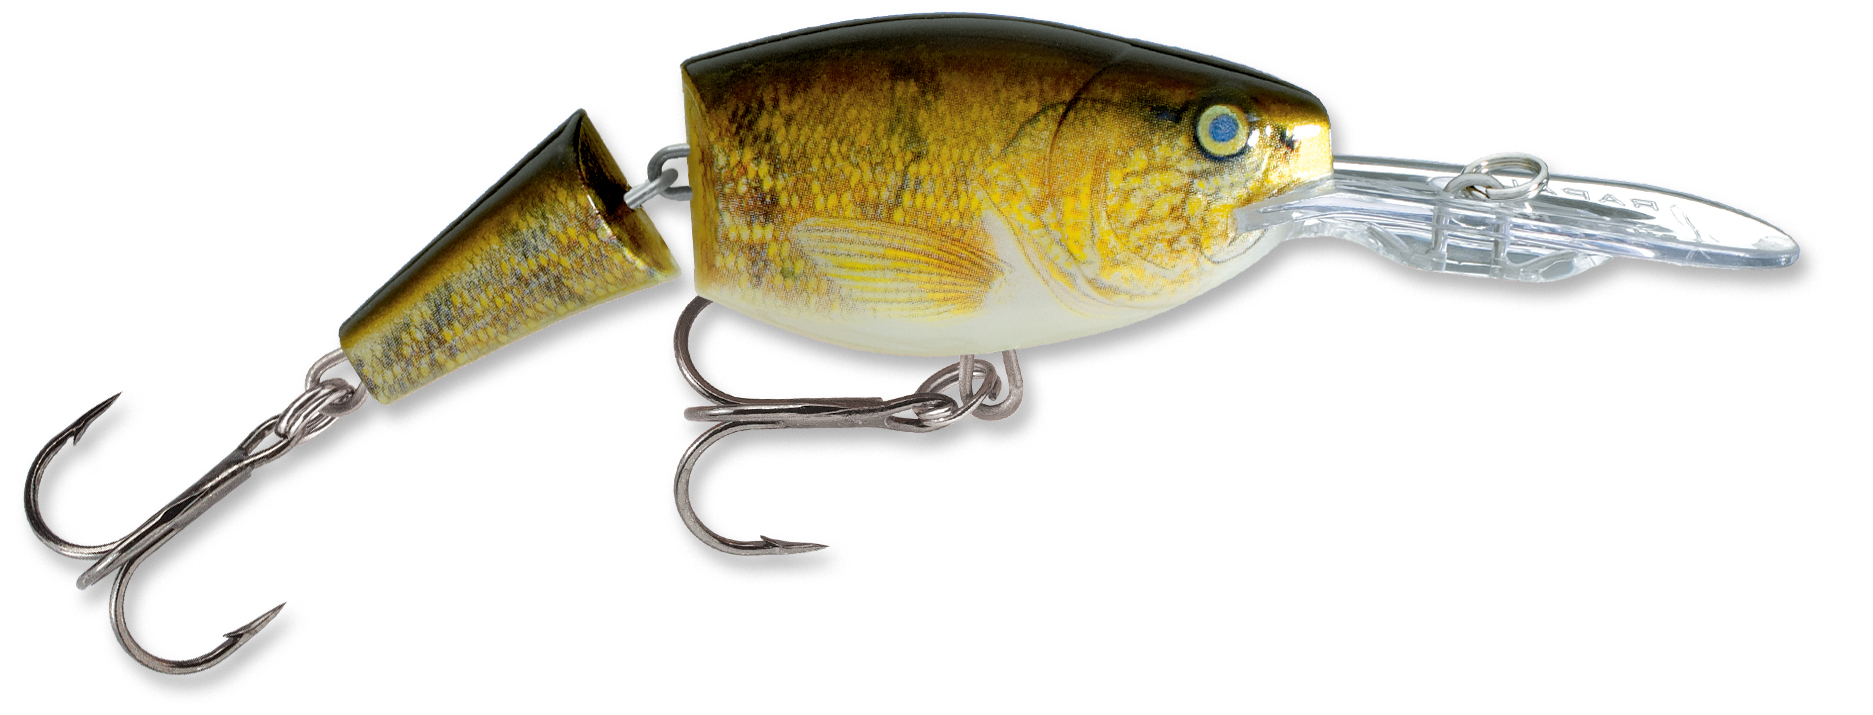 https://www.precisionfishing.com/img/products/022/022%20Rapala%20Jointed%20Shad%20Rap%20-%20Walleye.jpg